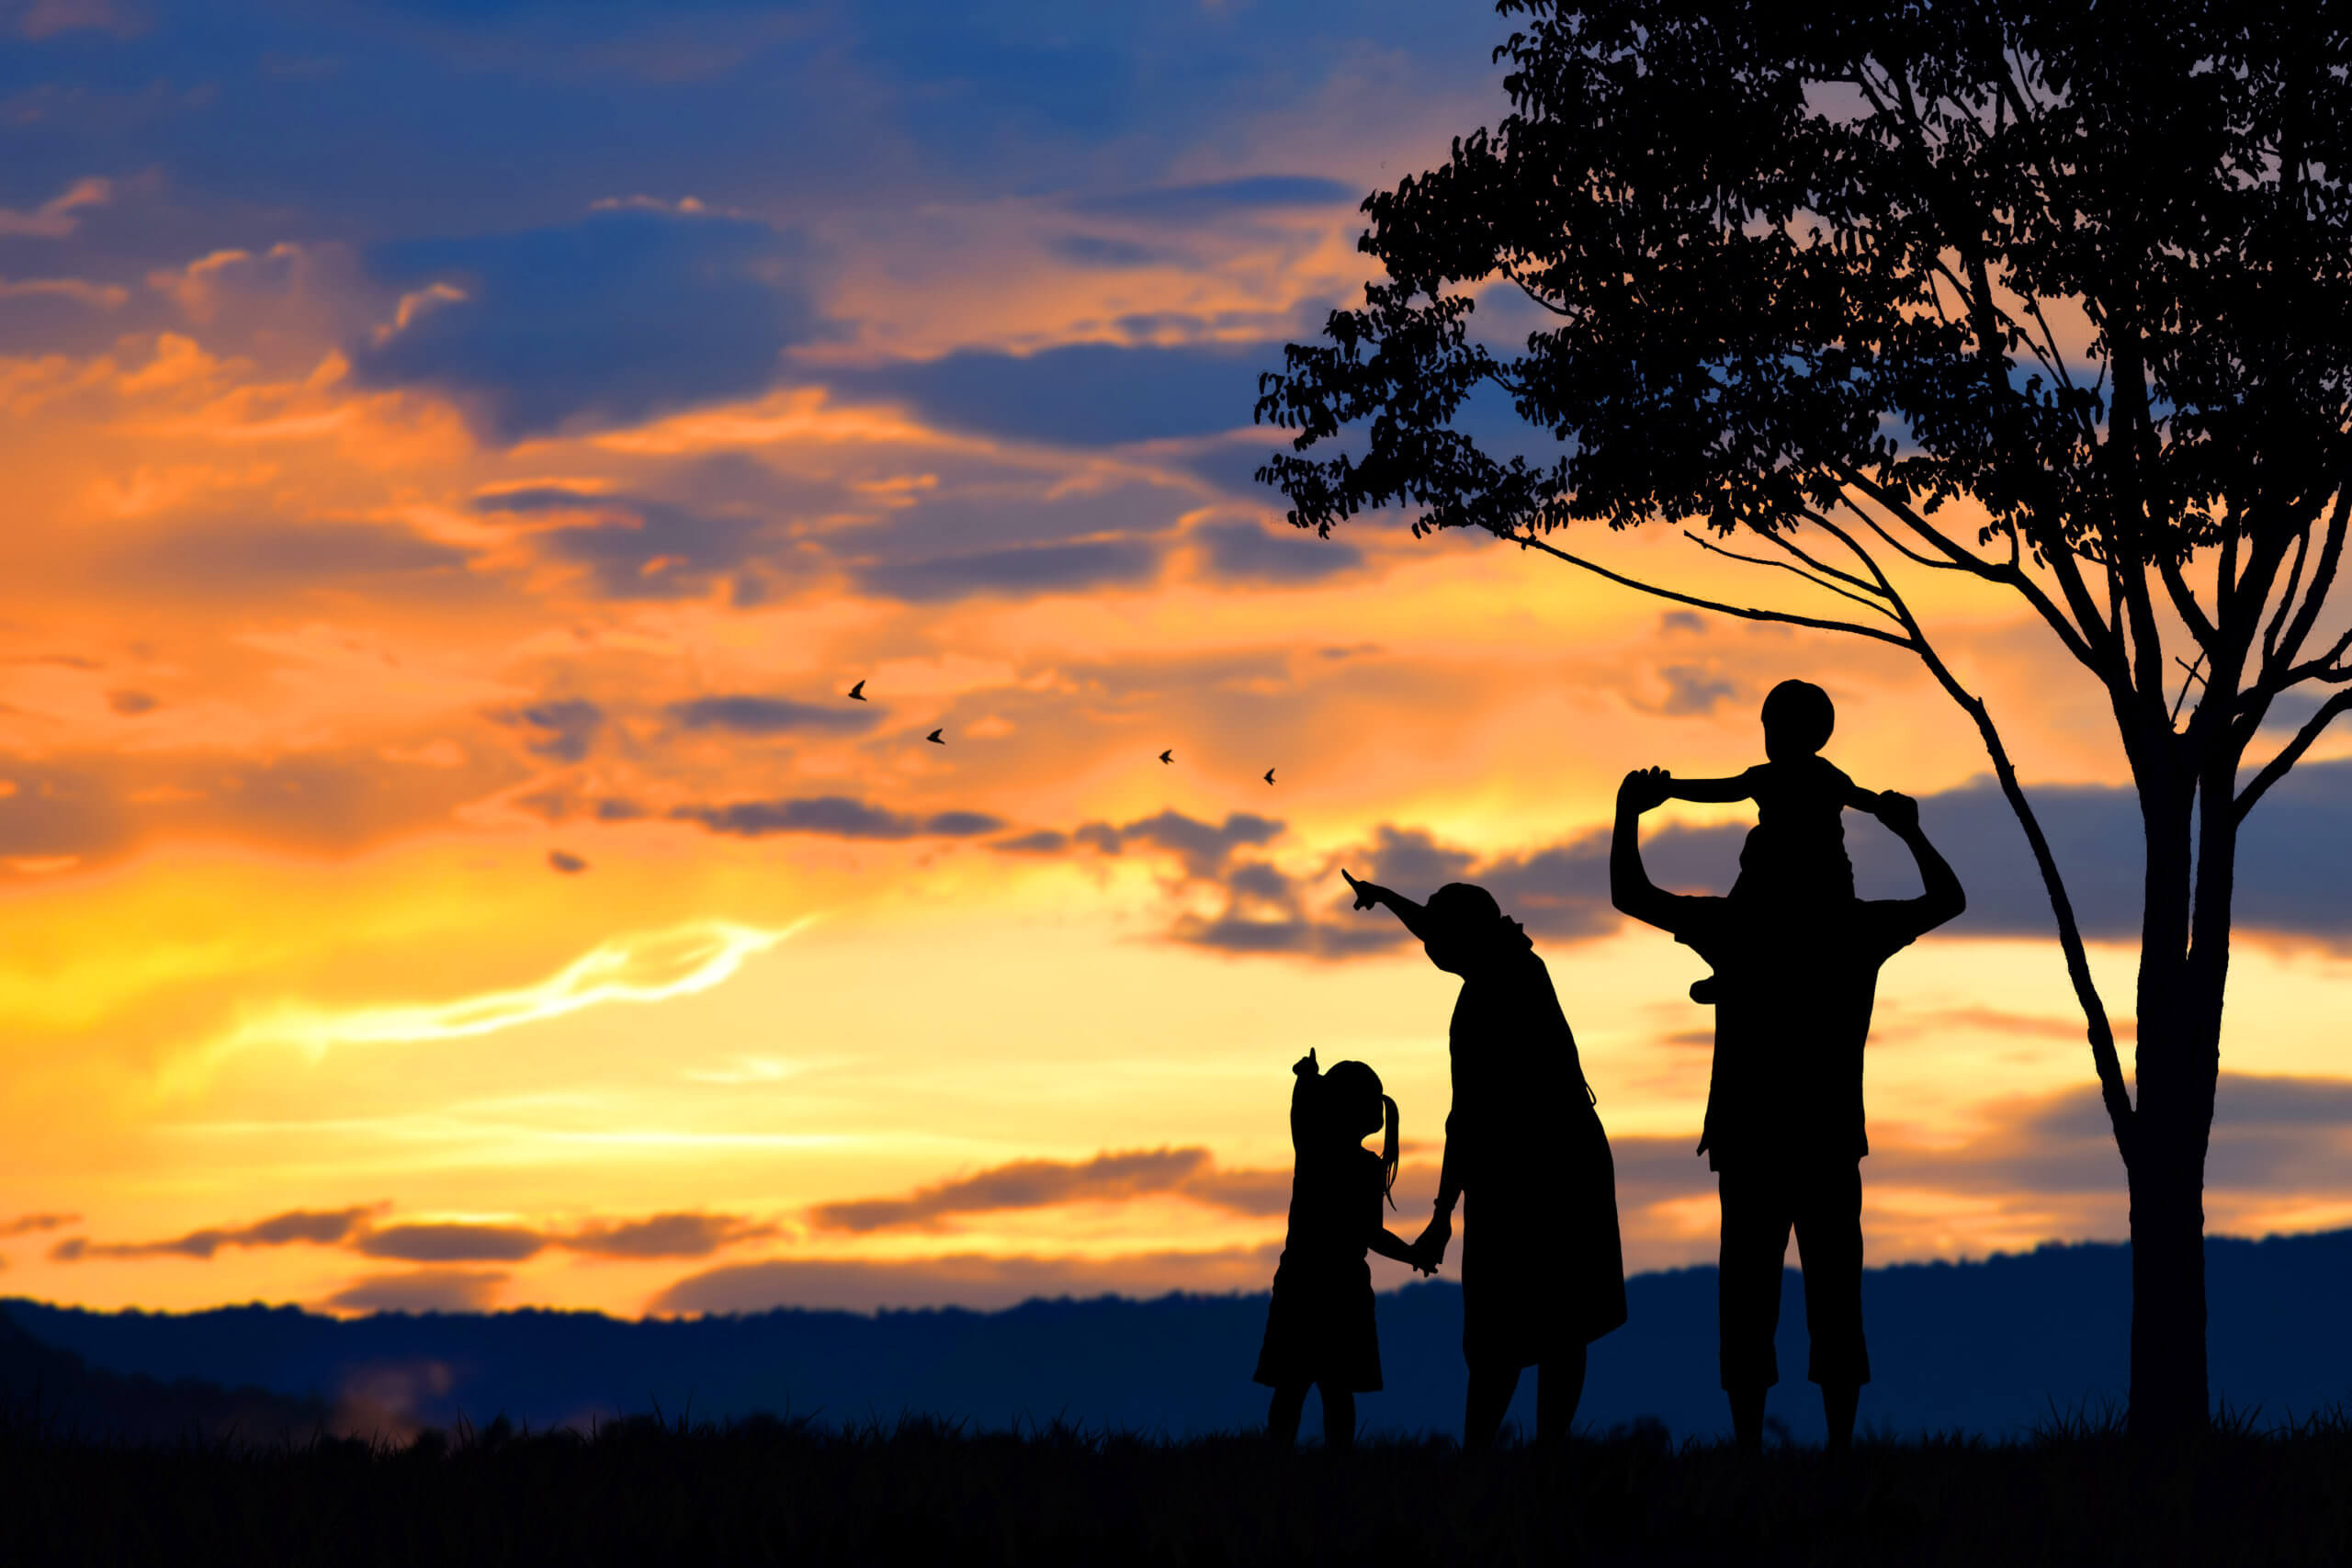 Stock photo: A family of four in silhouette stands next to a tree in front of a sunset as the mother points to the sky. © jes2uphoto/stock.adobe.comj